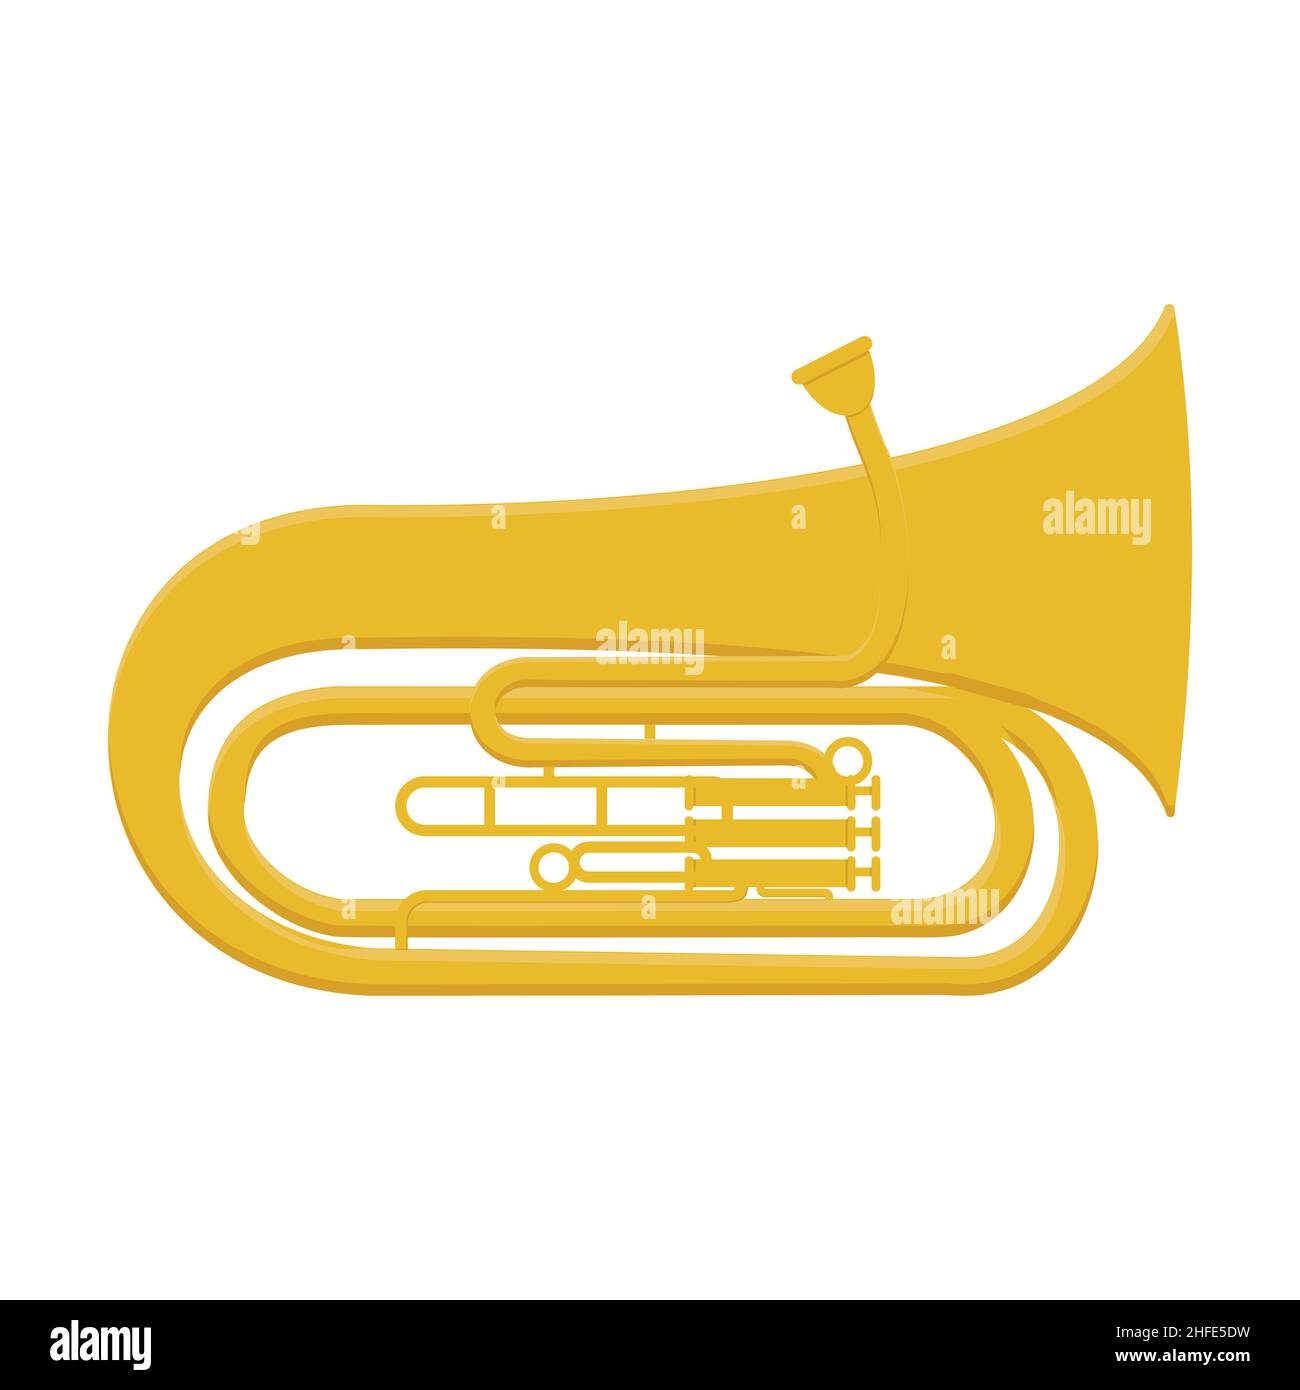 Brass Instruments Images – Browse 513,364 Stock Photos, Vectors